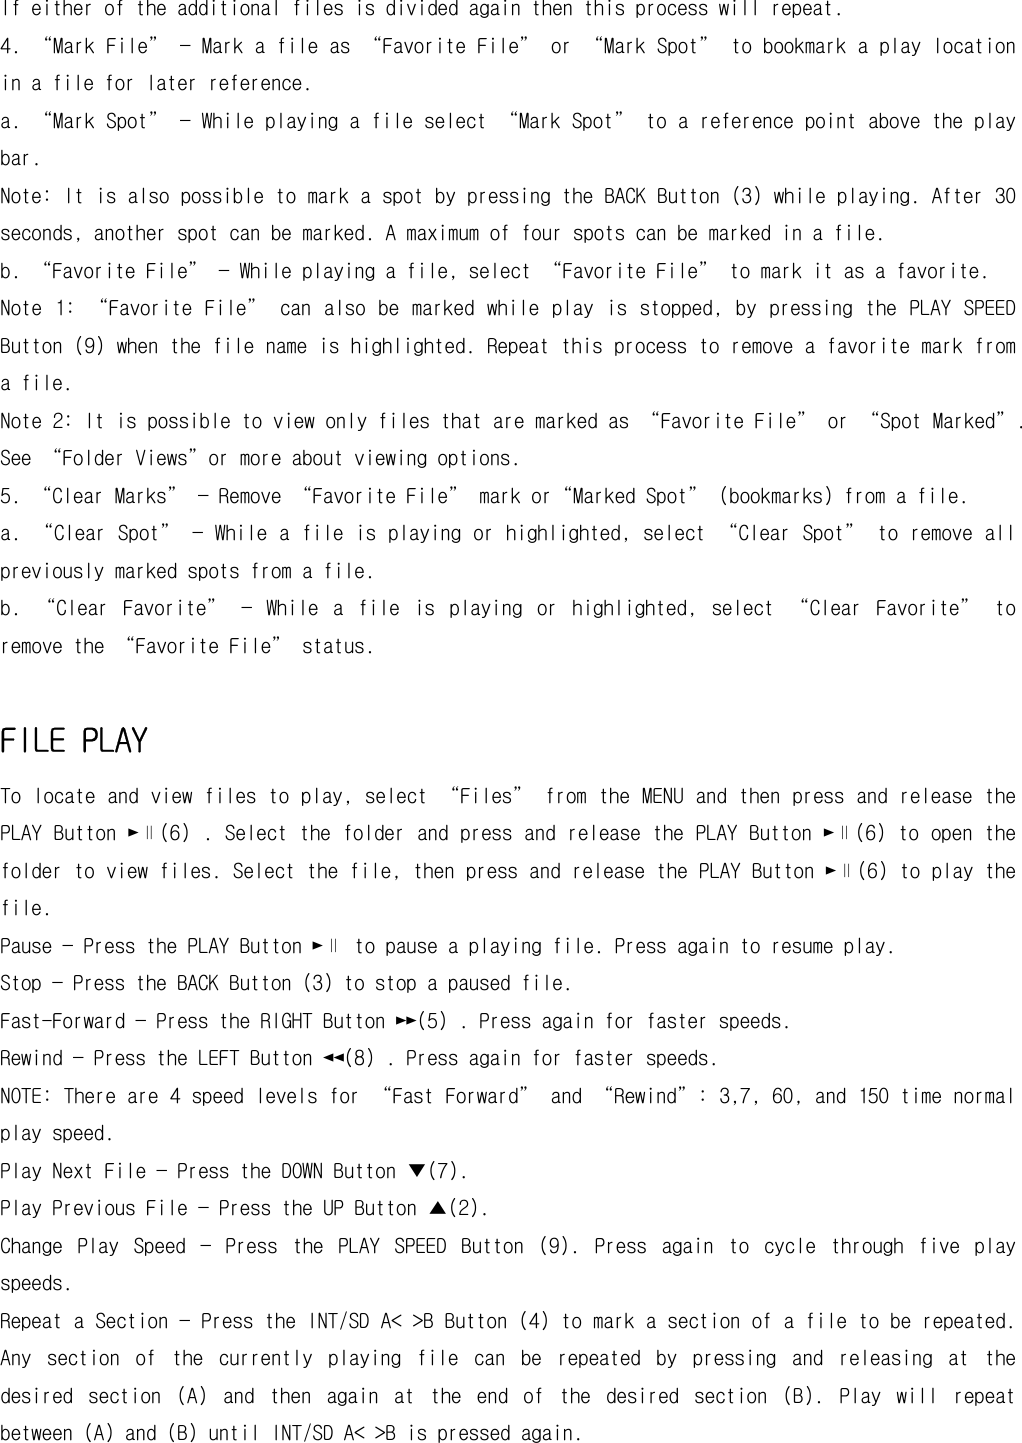 If either of the additional files is divided again then this process will repeat. 4. “Mark File” — Mark a file as “Favorite File” or “Mark Spot” to bookmark a play location in a file for later reference. a. “Mark Spot” — While playing a file select “Mark Spot” to a reference point above the play bar. Note: It is also possible to mark a spot by pressing the BACK Button (3) while playing. After 30 seconds, another spot can be marked. A maximum of four spots can be marked in a file. b. “Favorite File” — While playing a file, select “Favorite File” to mark it as a favorite. Note 1:  “Favorite File”  can  also be marked  while play  is  stopped, by  pressing the PLAY  SPEED Button (9) when the file name is highlighted. Repeat this process to remove a favorite mark from a file. Note 2: It is possible to view only files that are marked as “Favorite File” or “Spot Marked”. See “Folder Views”or more about viewing options. 5. “Clear Marks” — Remove “Favorite File” mark or“Marked Spot” (bookmarks) from a file. a. “Clear Spot” — While a file is playing or highlighted, select “Clear Spot” to remove all previously marked spots from a file. b.  “Clear  Favorite”  —  While  a  file  is  playing  or  highlighted,  select  “Clear  Favorite”  to remove the “Favorite File” status.  FILE PLAY To locate and view files to play, select “Files” from the MENU and then press and release the PLAY Button ►∥(6) . Select the folder and press and release the PLAY Button ►∥(6) to open the folder to view files. Select the file, then press and release the PLAY Button ►∥(6) to play the file.  Pause — Press the PLAY Button ►∥ to pause a playing file. Press again to resume play. Stop — Press the BACK Button (3) to stop a paused file. Fast-Forward — Press the RIGHT Button ►►(5) . Press again for faster speeds. Rewind — Press the LEFT Button ◄◄(8) . Press again for faster speeds. NOTE: There are 4 speed levels for “Fast Forward” and “Rewind”: 3,7, 60, and 150 time normal play speed. Play Next File — Press the DOWN Button ▼(7). Play Previous File — Press the UP Button ▲(2). Change  Play  Speed  —  Press  the  PLAY  SPEED  Button  (9).  Press  again  to  cycle  through  five  play speeds. Repeat a Section — Press the INT/SD A&lt; &gt;B Button (4) to mark a section of a file to be repeated. Any  section  of  the  currently  playing  file  can  be  repeated  by  pressing  and  releasing  at  the desired  section  (A)  and  then  again  at  the  end  of  the  desired  section  (B).  Play  will  repeat between (A) and (B) until INT/SD A&lt; &gt;B is pressed again. 